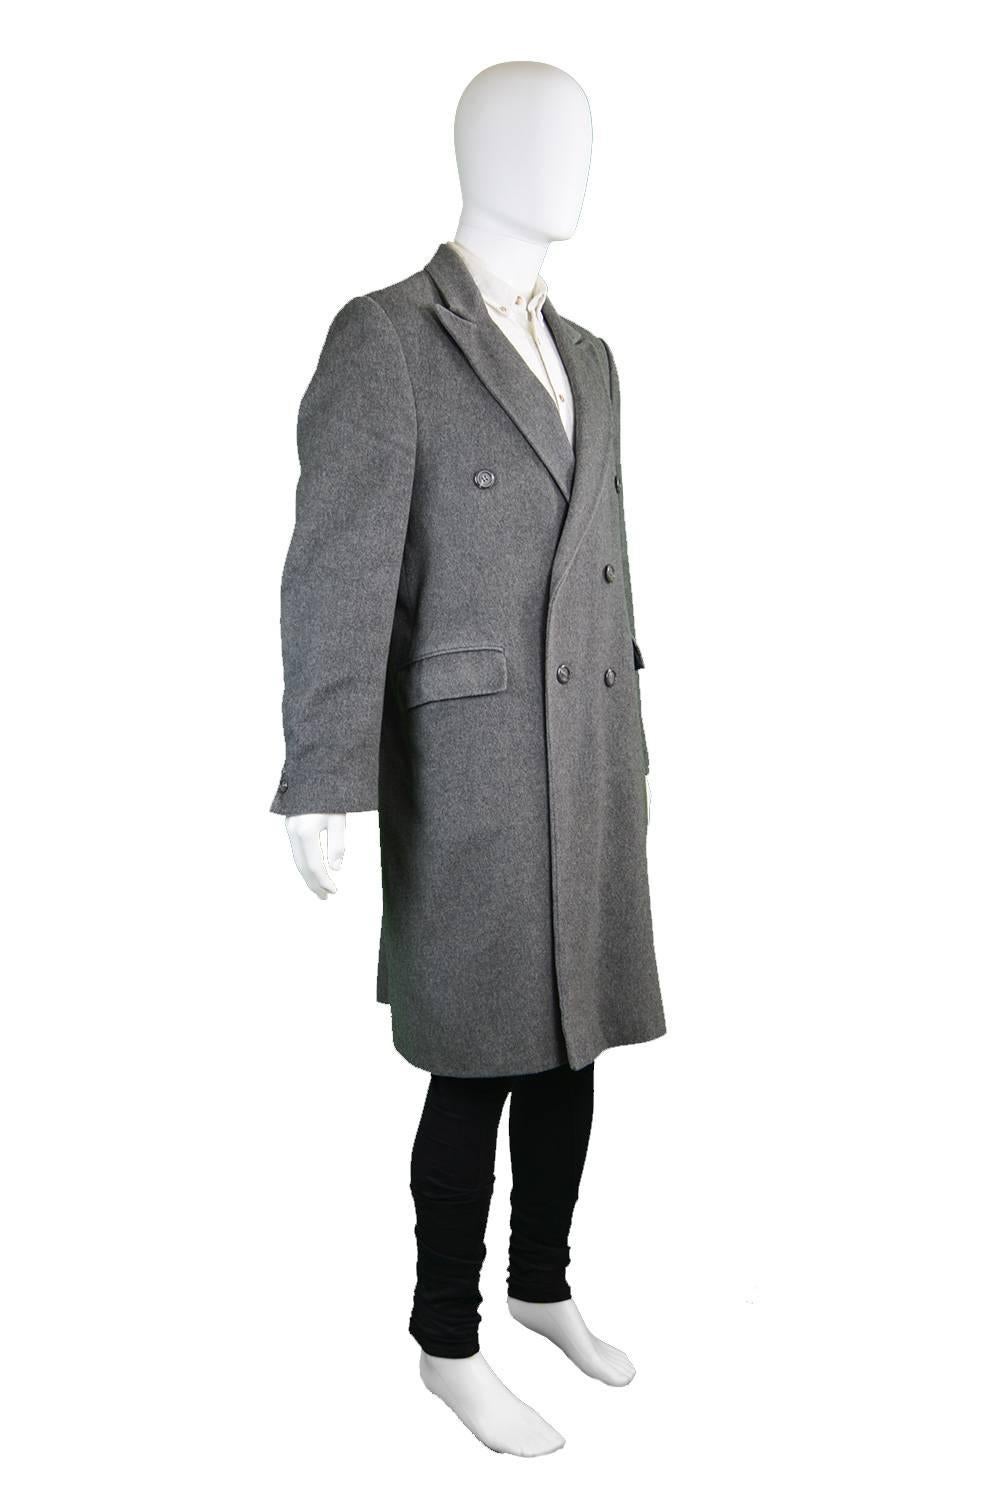 Gray 1960s Take 6 Carnaby Street Mens Wool & Cashmere Coat Vintage 